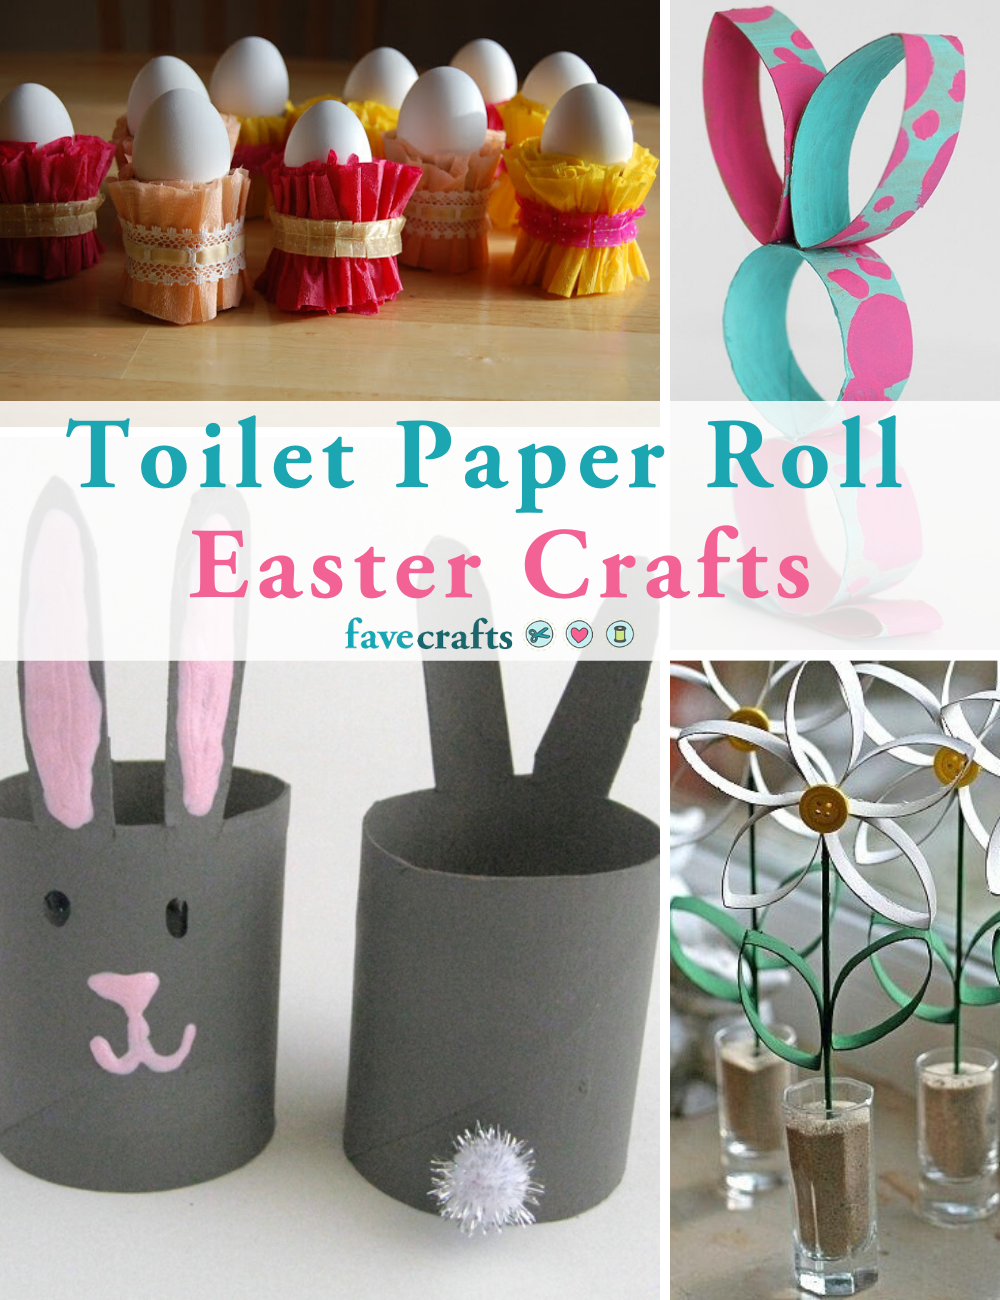 Quick Toilet Paper Roll Bunnies - East Crafts for Kids - Red Ted